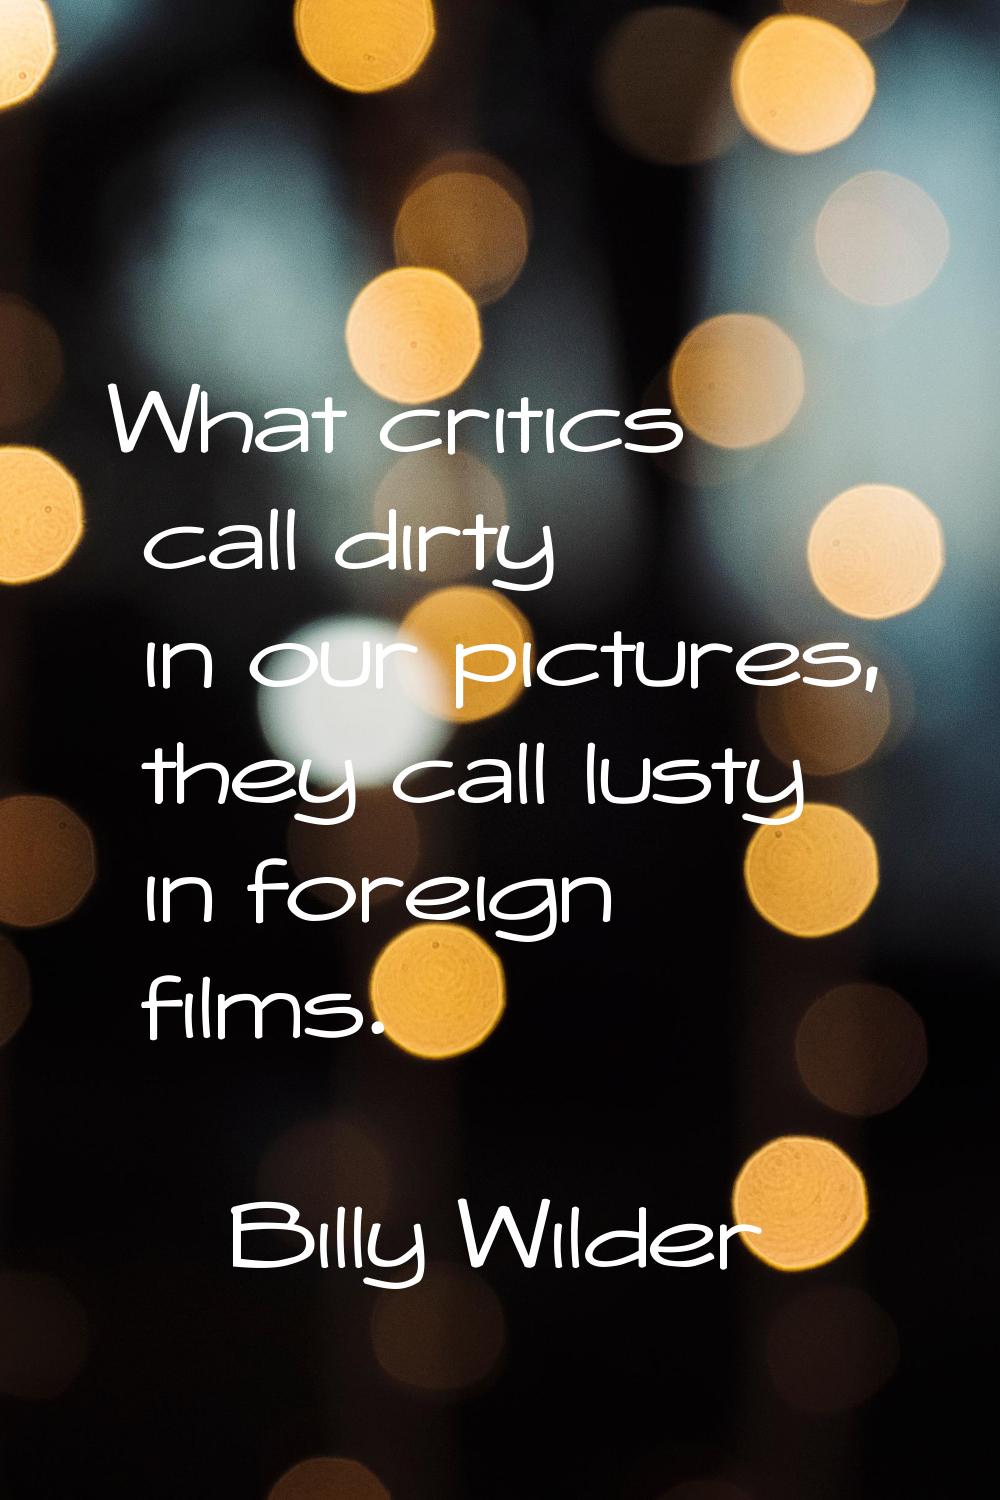 What critics call dirty in our pictures, they call lusty in foreign films.